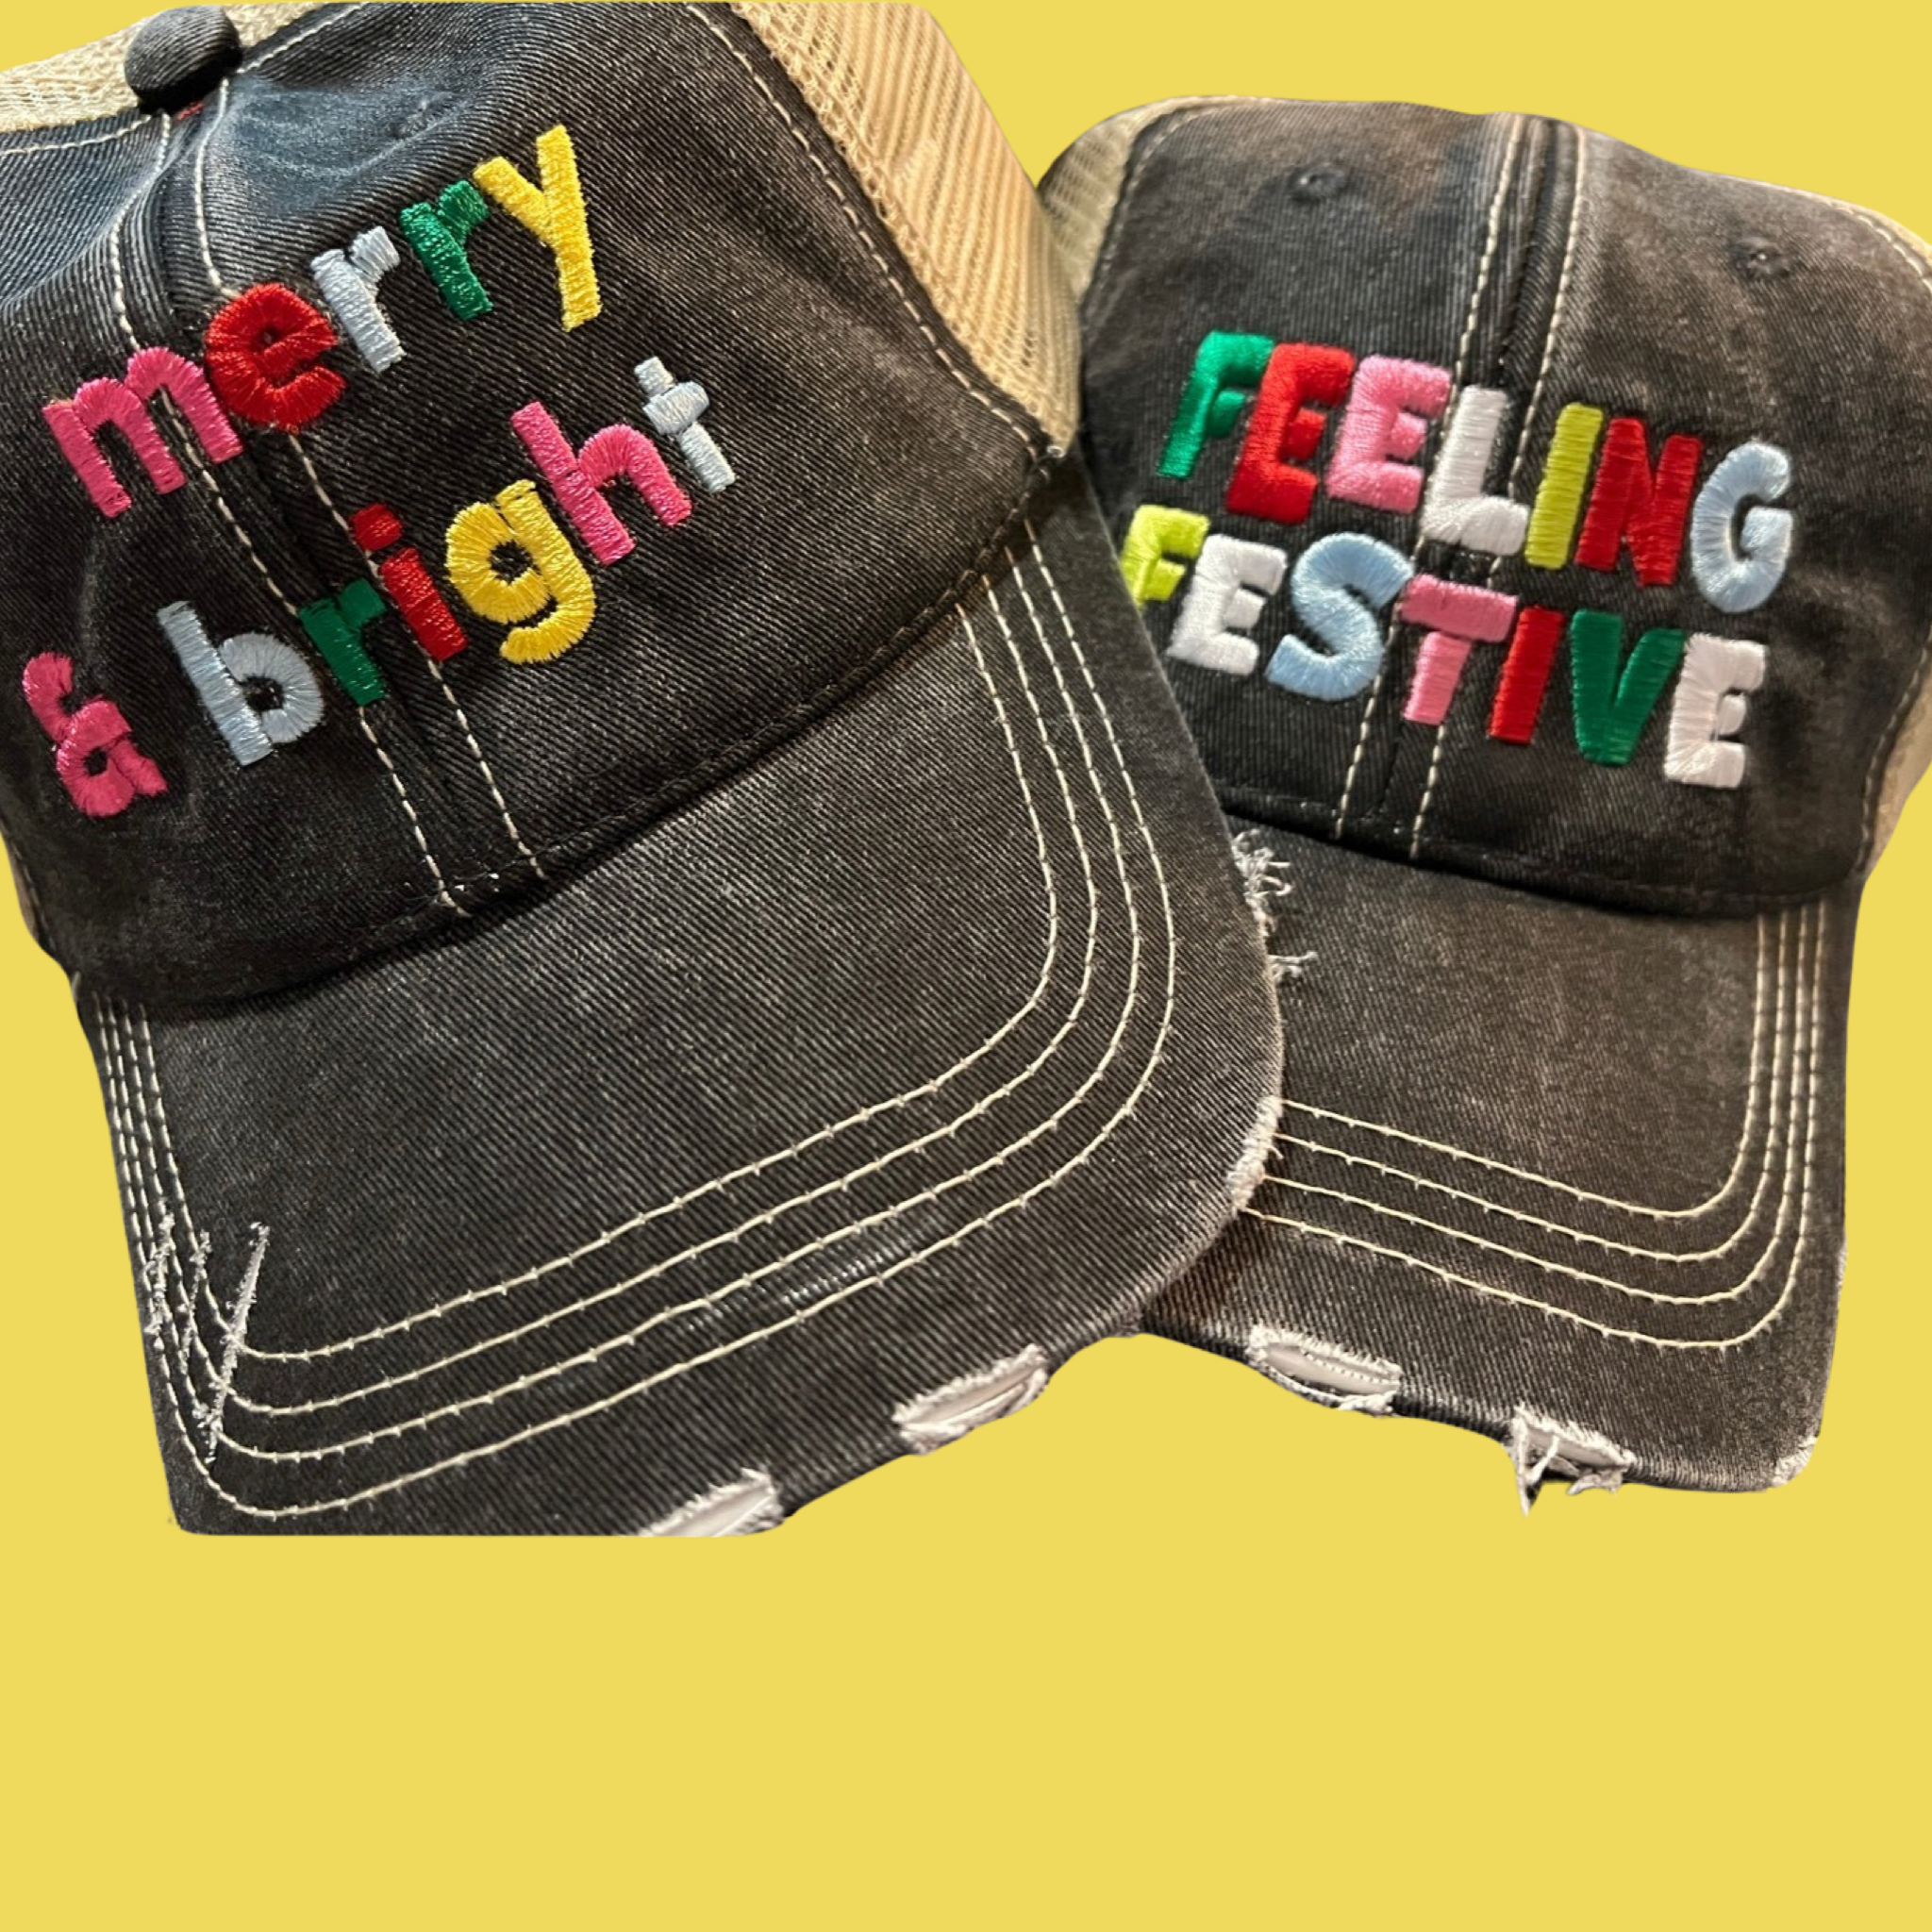 Merry and Bright ball cap